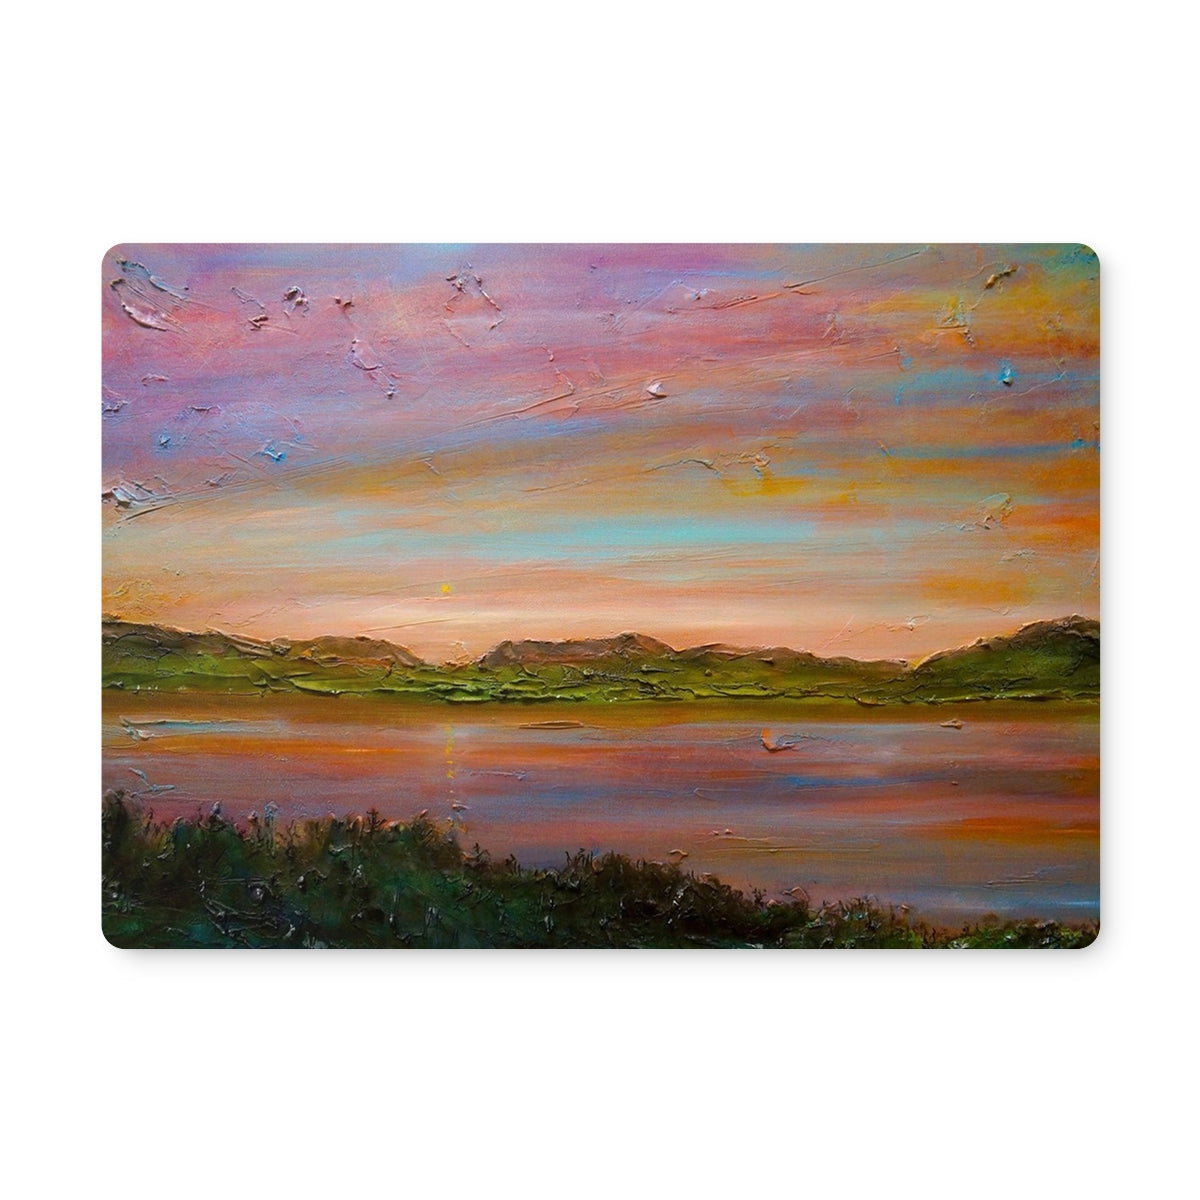 Gourock Golf Club Sunset Art Gifts Placemat-Placemats-River Clyde Art Gallery-2 Placemats-Paintings, Prints, Homeware, Art Gifts From Scotland By Scottish Artist Kevin Hunter